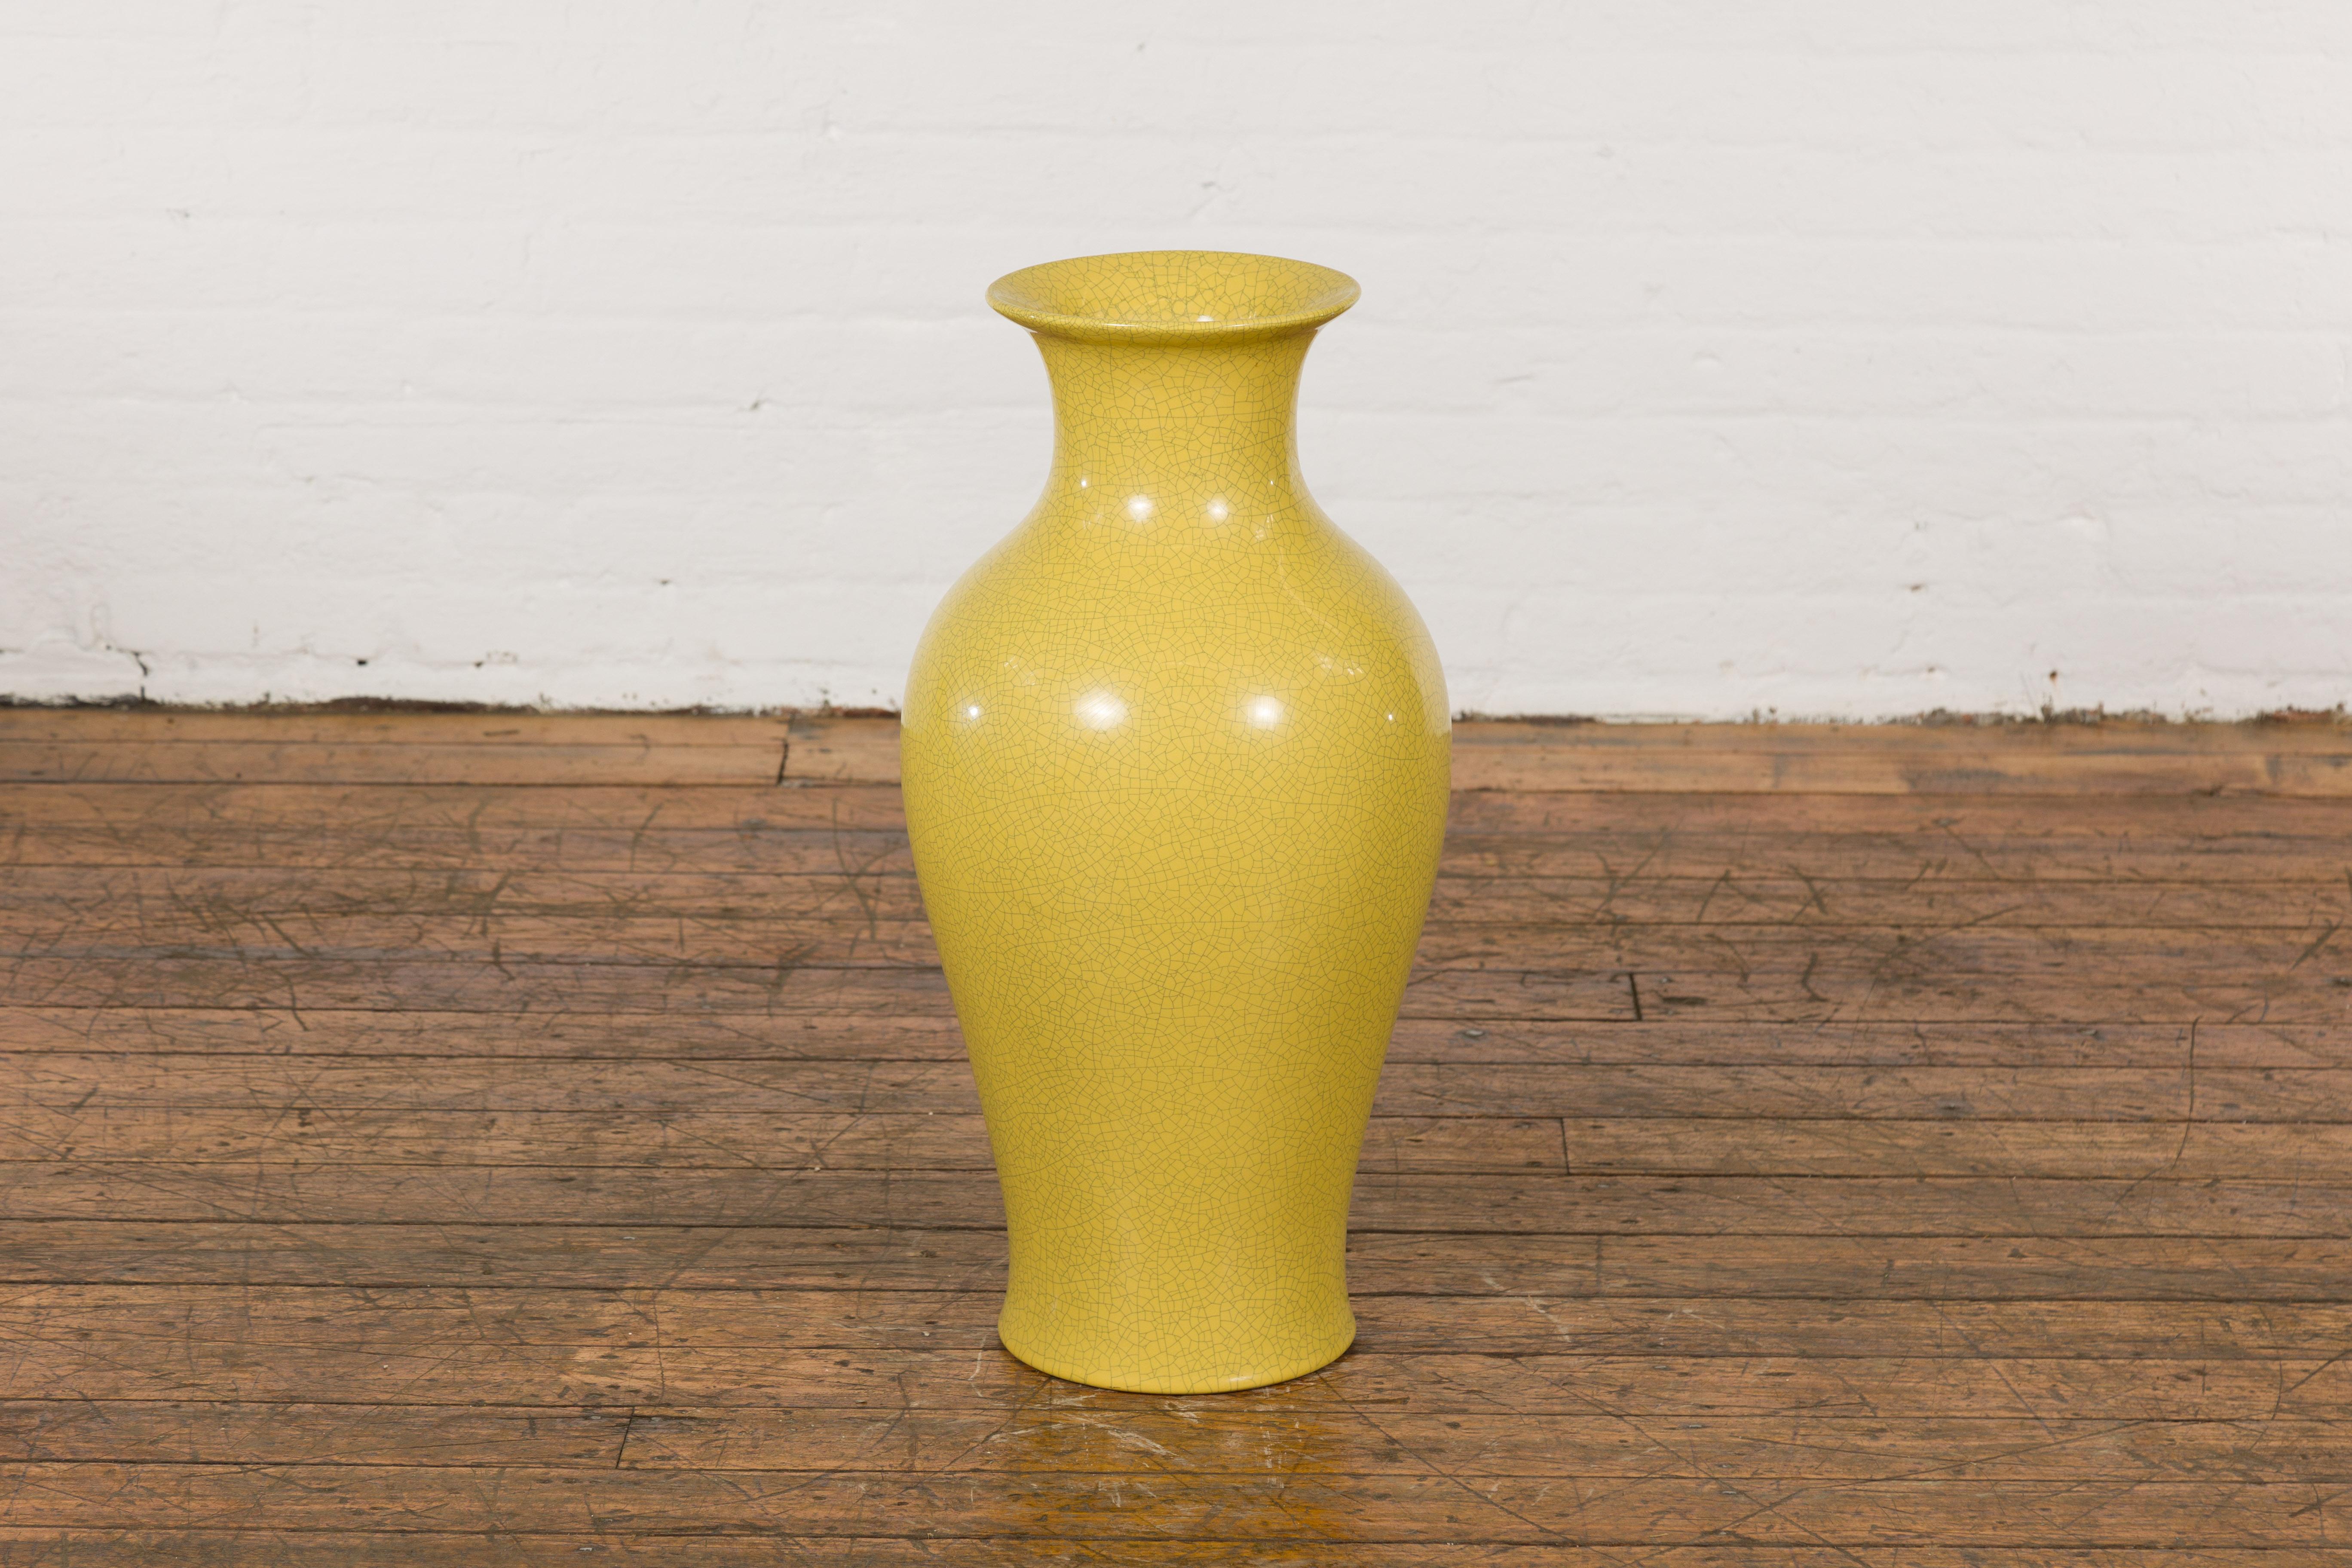 Chinese Vintage Altar Vase with Yellow Crackle Finish and Flaring Neck In Good Condition For Sale In Yonkers, NY